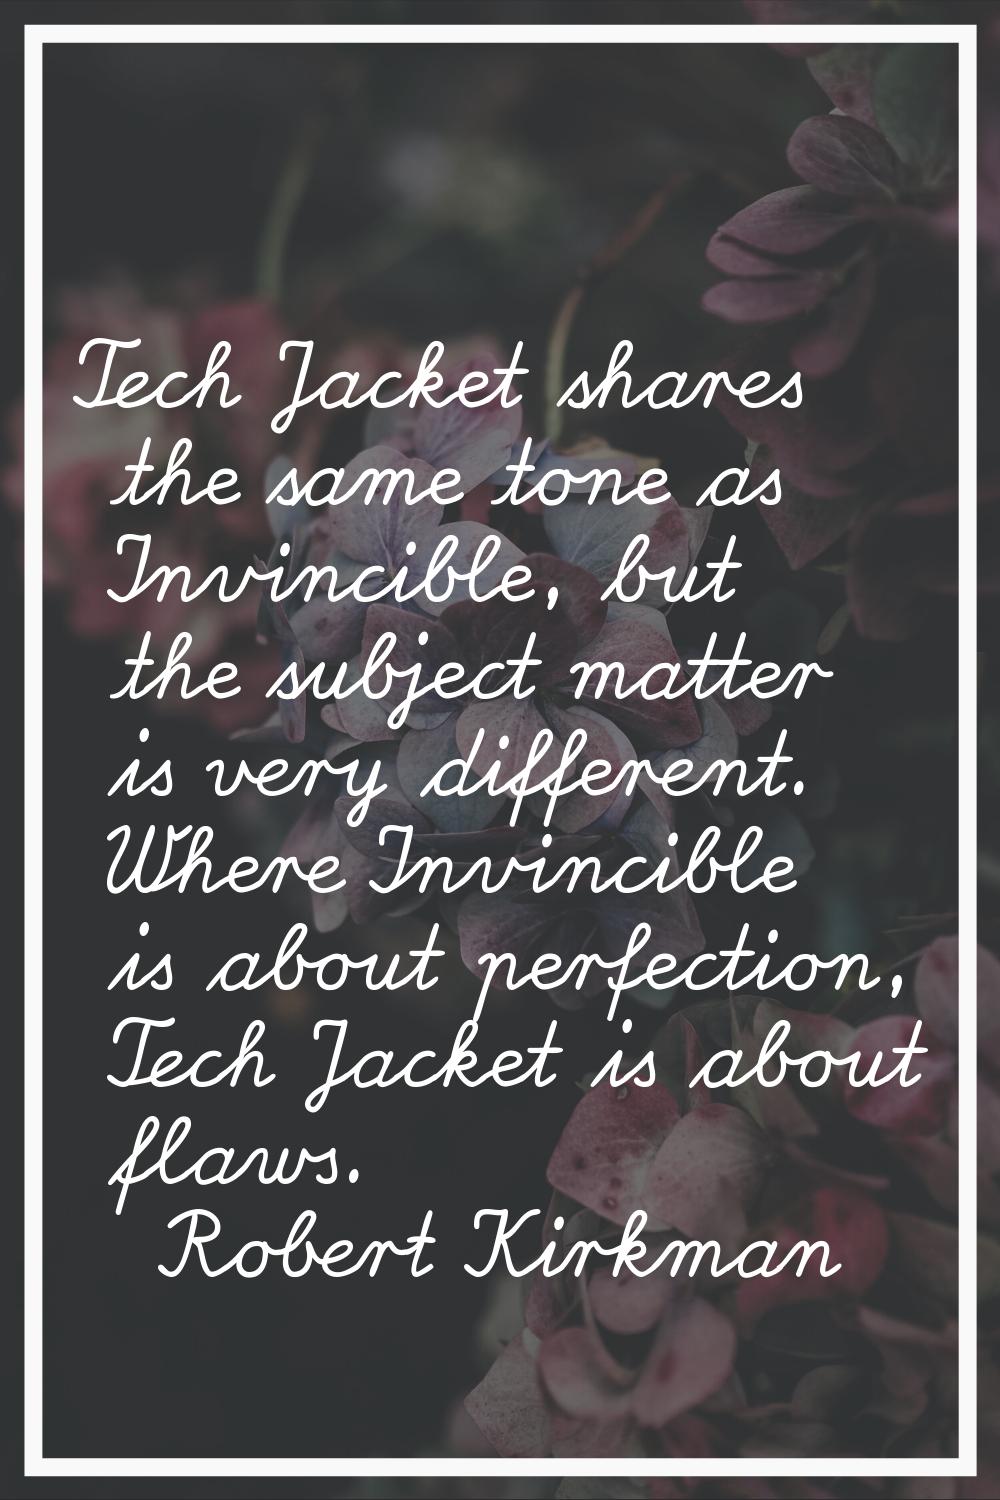 Tech Jacket shares the same tone as Invincible, but the subject matter is very different. Where Inv